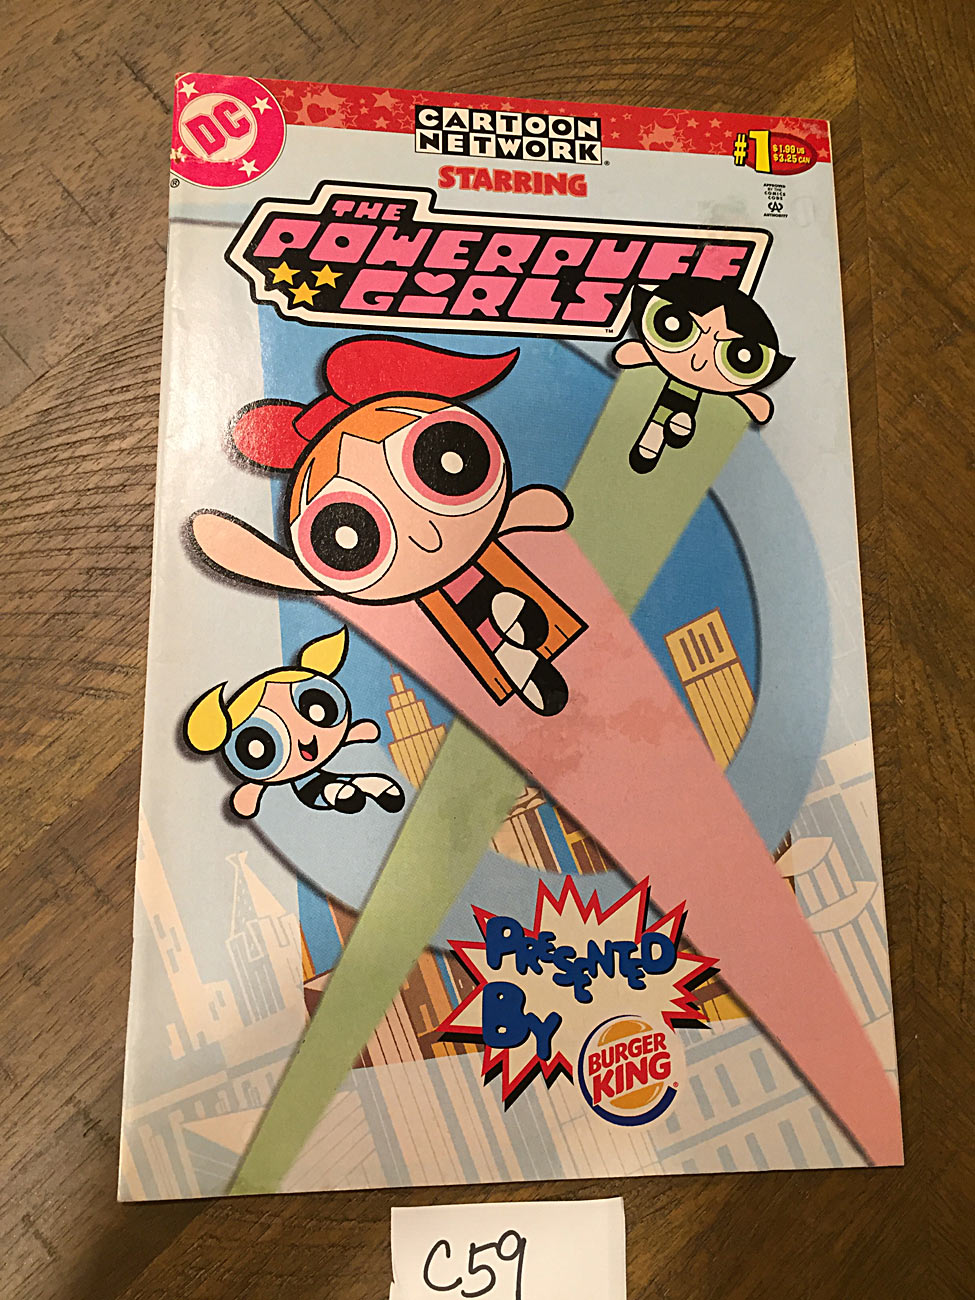 The Powerpuff Girls Cartoon Network DC Comics Issue Number 1 (2002) Presented by Burger King [C59]